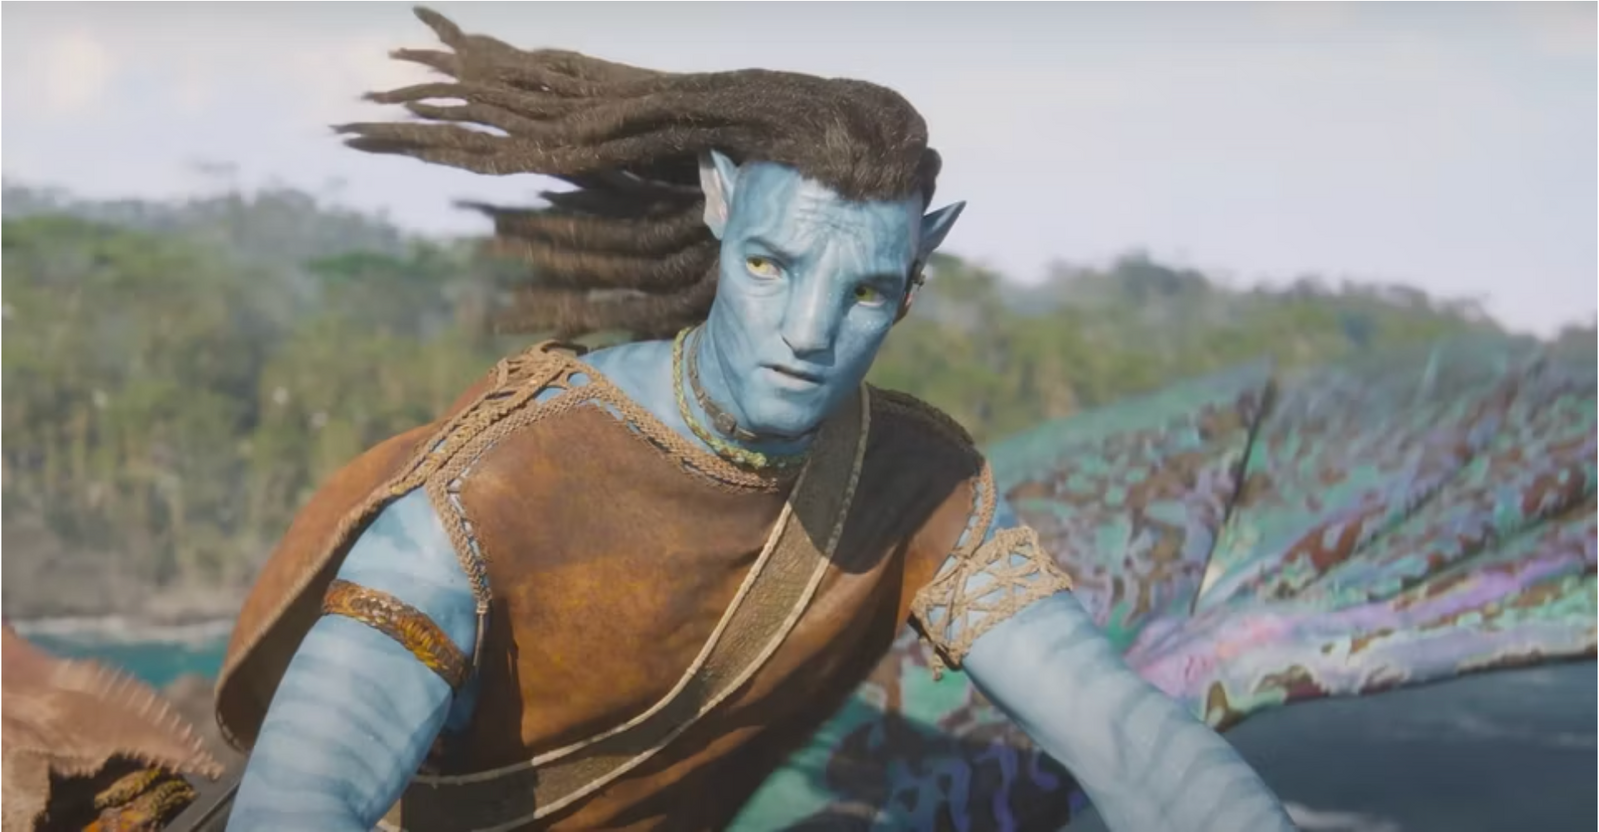 Avatar 2 Release Date, Plot, Trailer, Cast, News & Everything You Need to Know